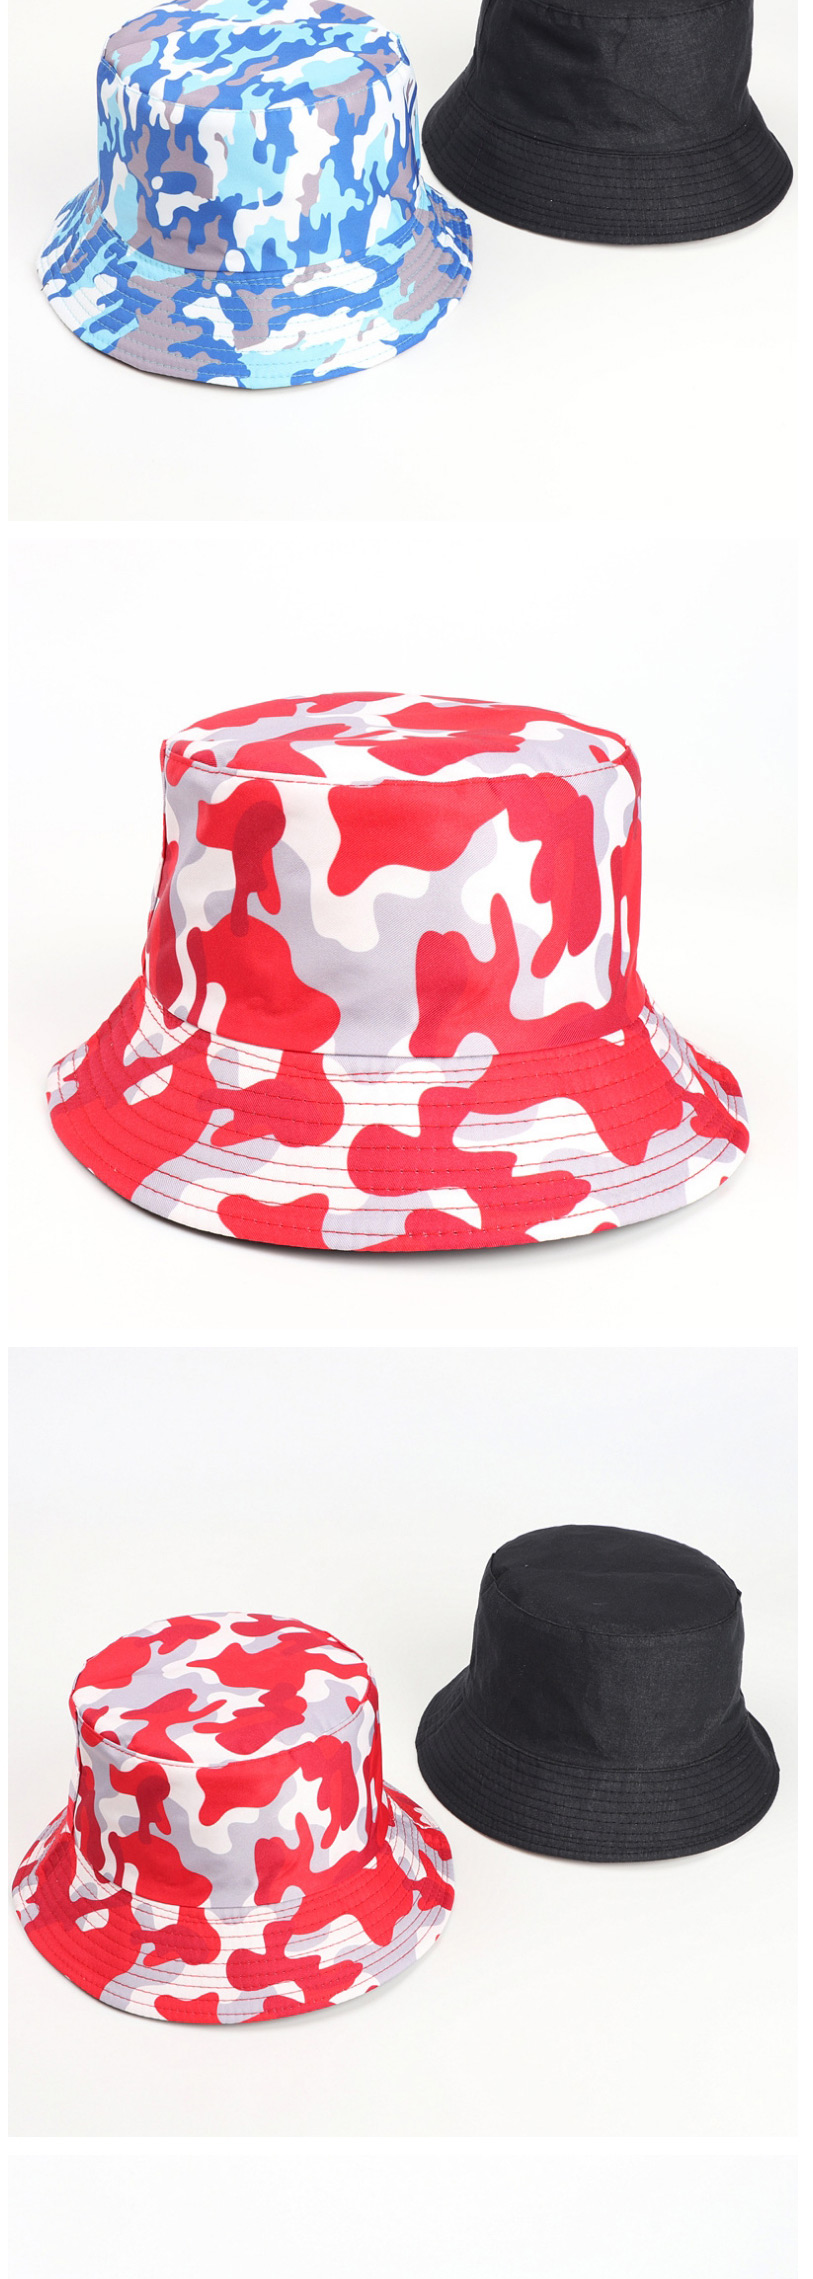 Fashion Pink Printed Double-sided Multicolor Camouflage Fisherman Hat,Sun Hats